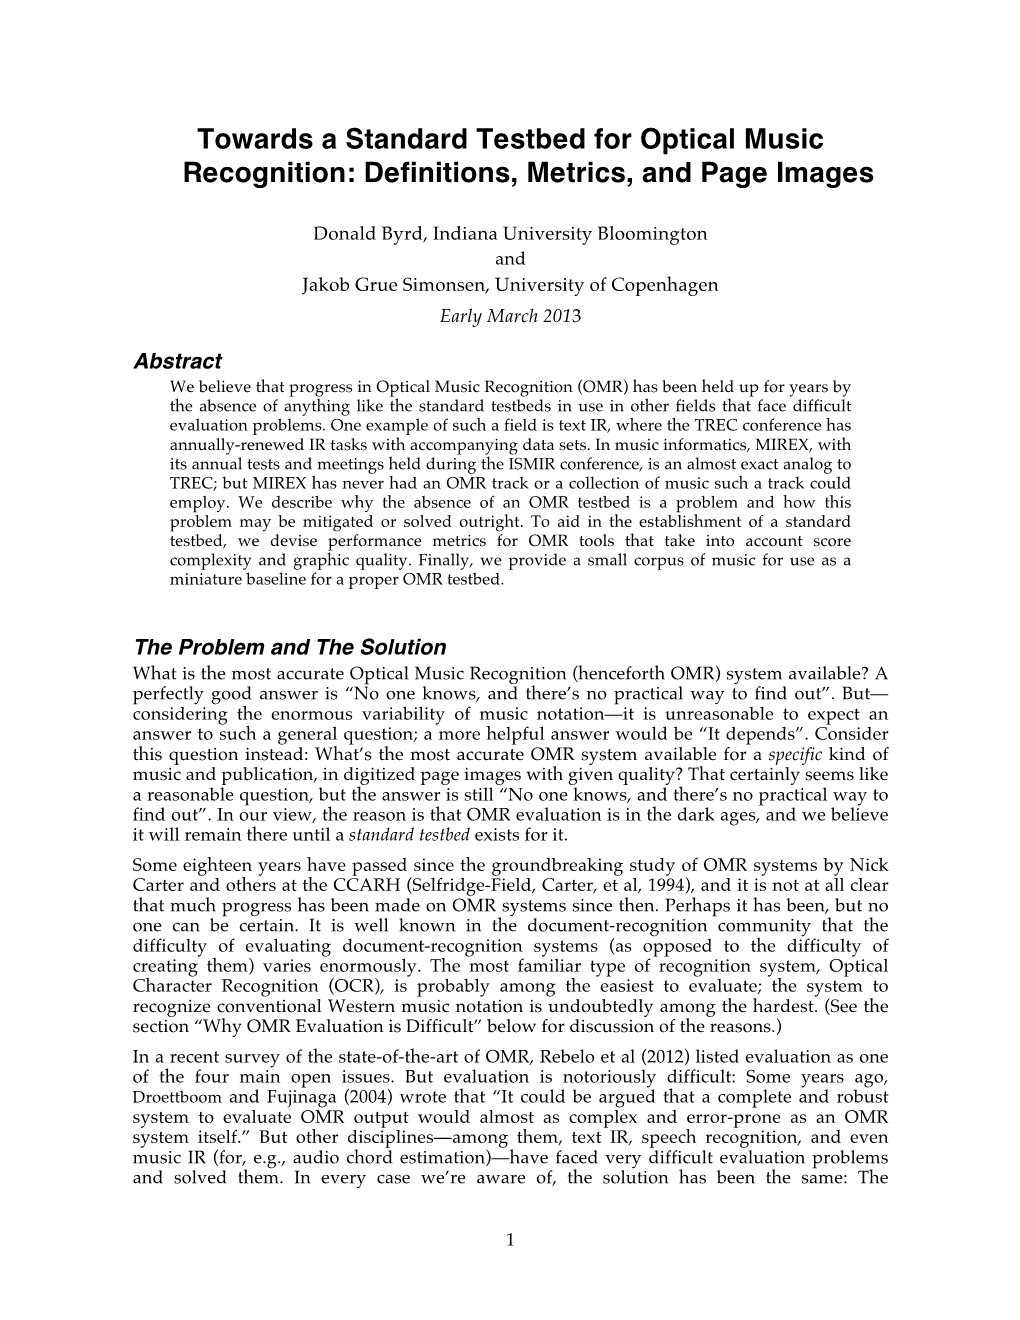 Towards a Standard Testbed for Optical Music Recognition: Definitions, Metrics, and Page Images